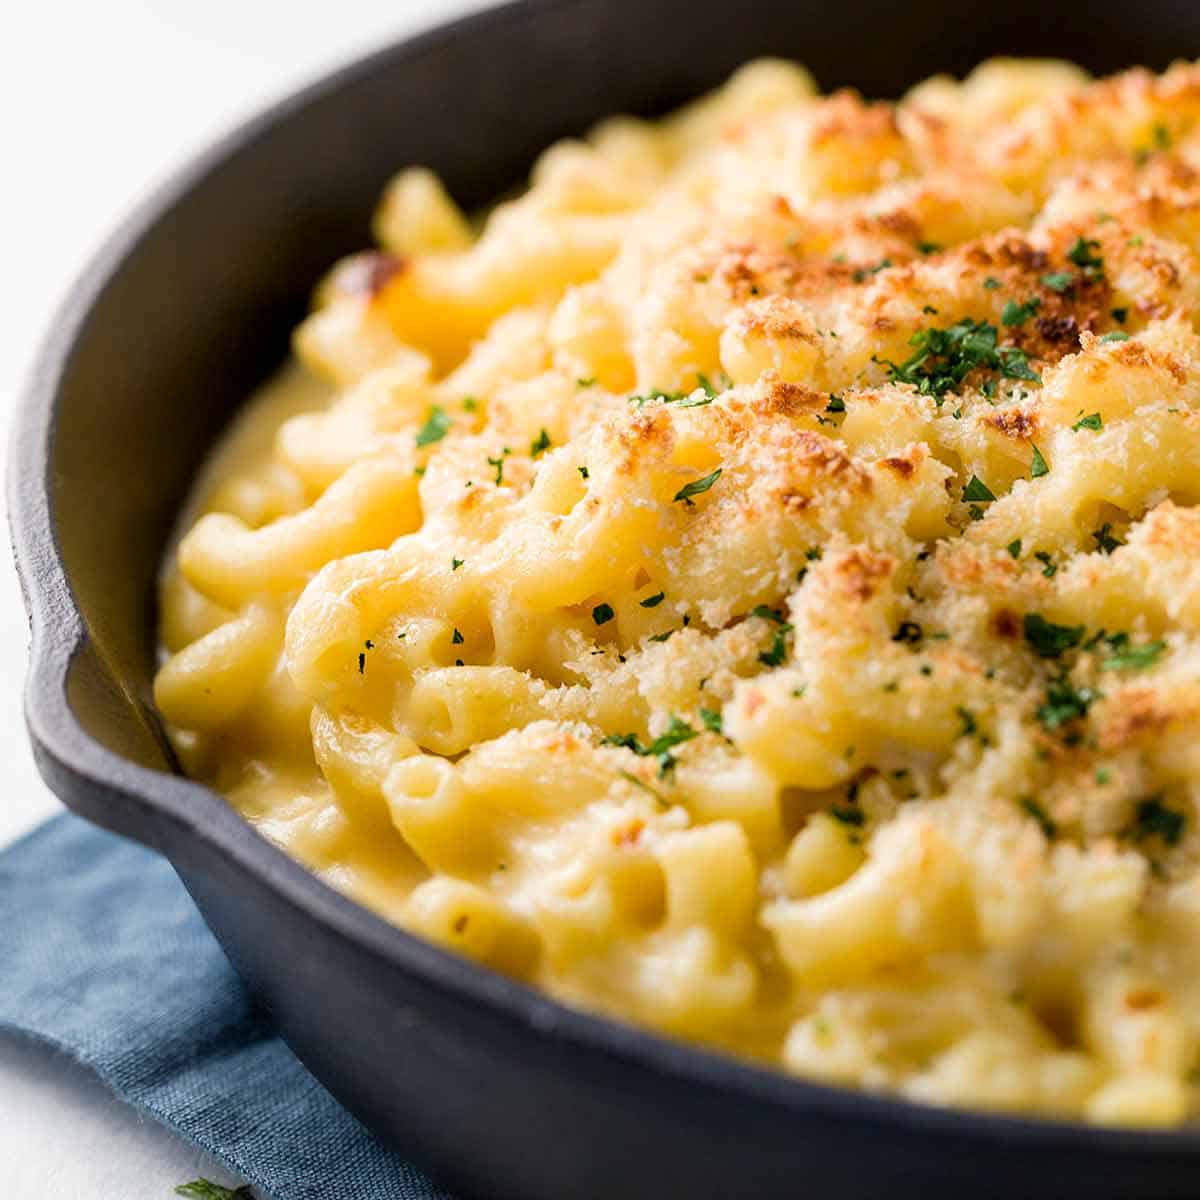 Baked Macaroni And Cheese Recipes With Bread Crumbs
 Baked Macaroni and Cheese with Bread Crumb Topping